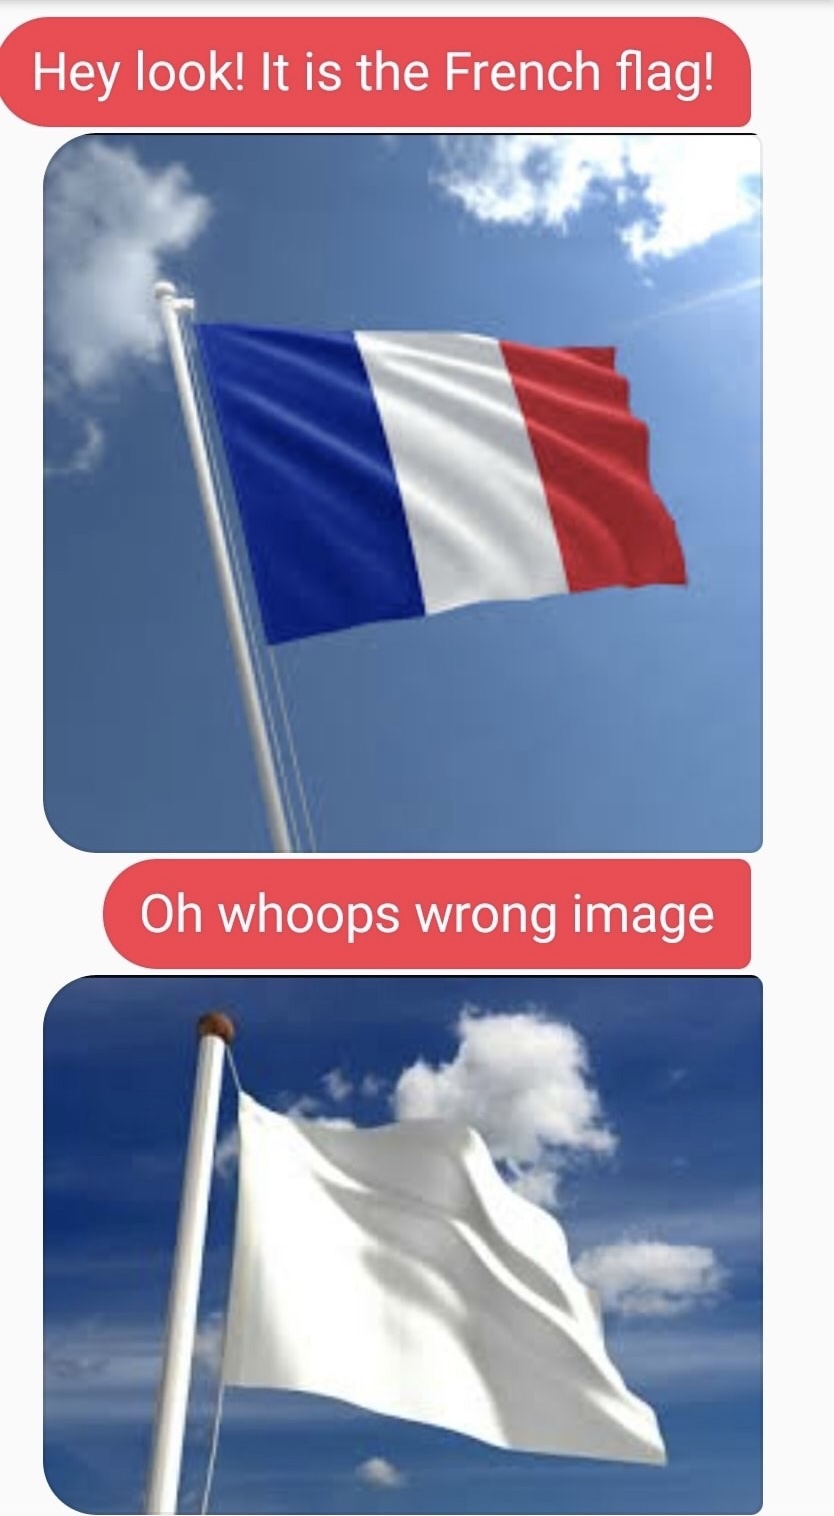 guinea flag - Hey look! It is the French flag! Oh whoops wrong image